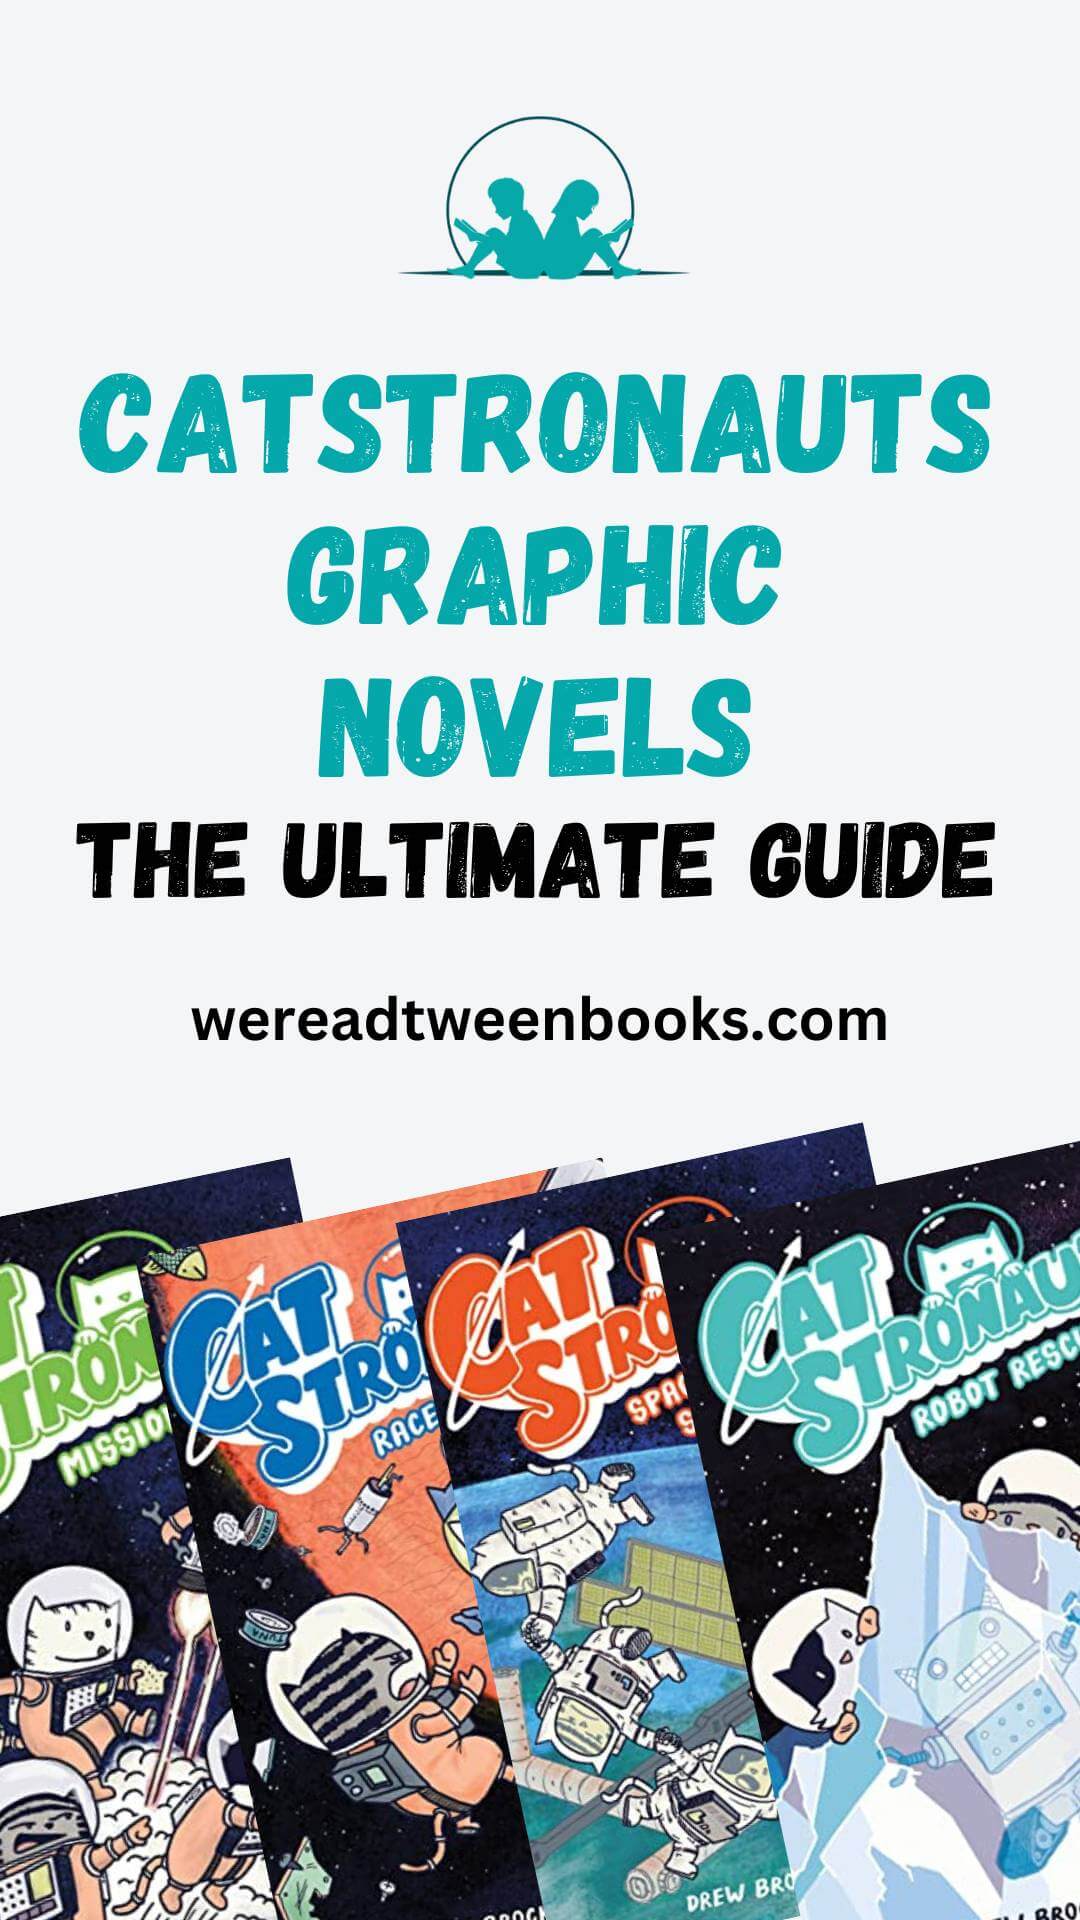 Check out all of the Catstronaut books in order in this ultimate guide to the Catstronauts series from We Read Tween Books.